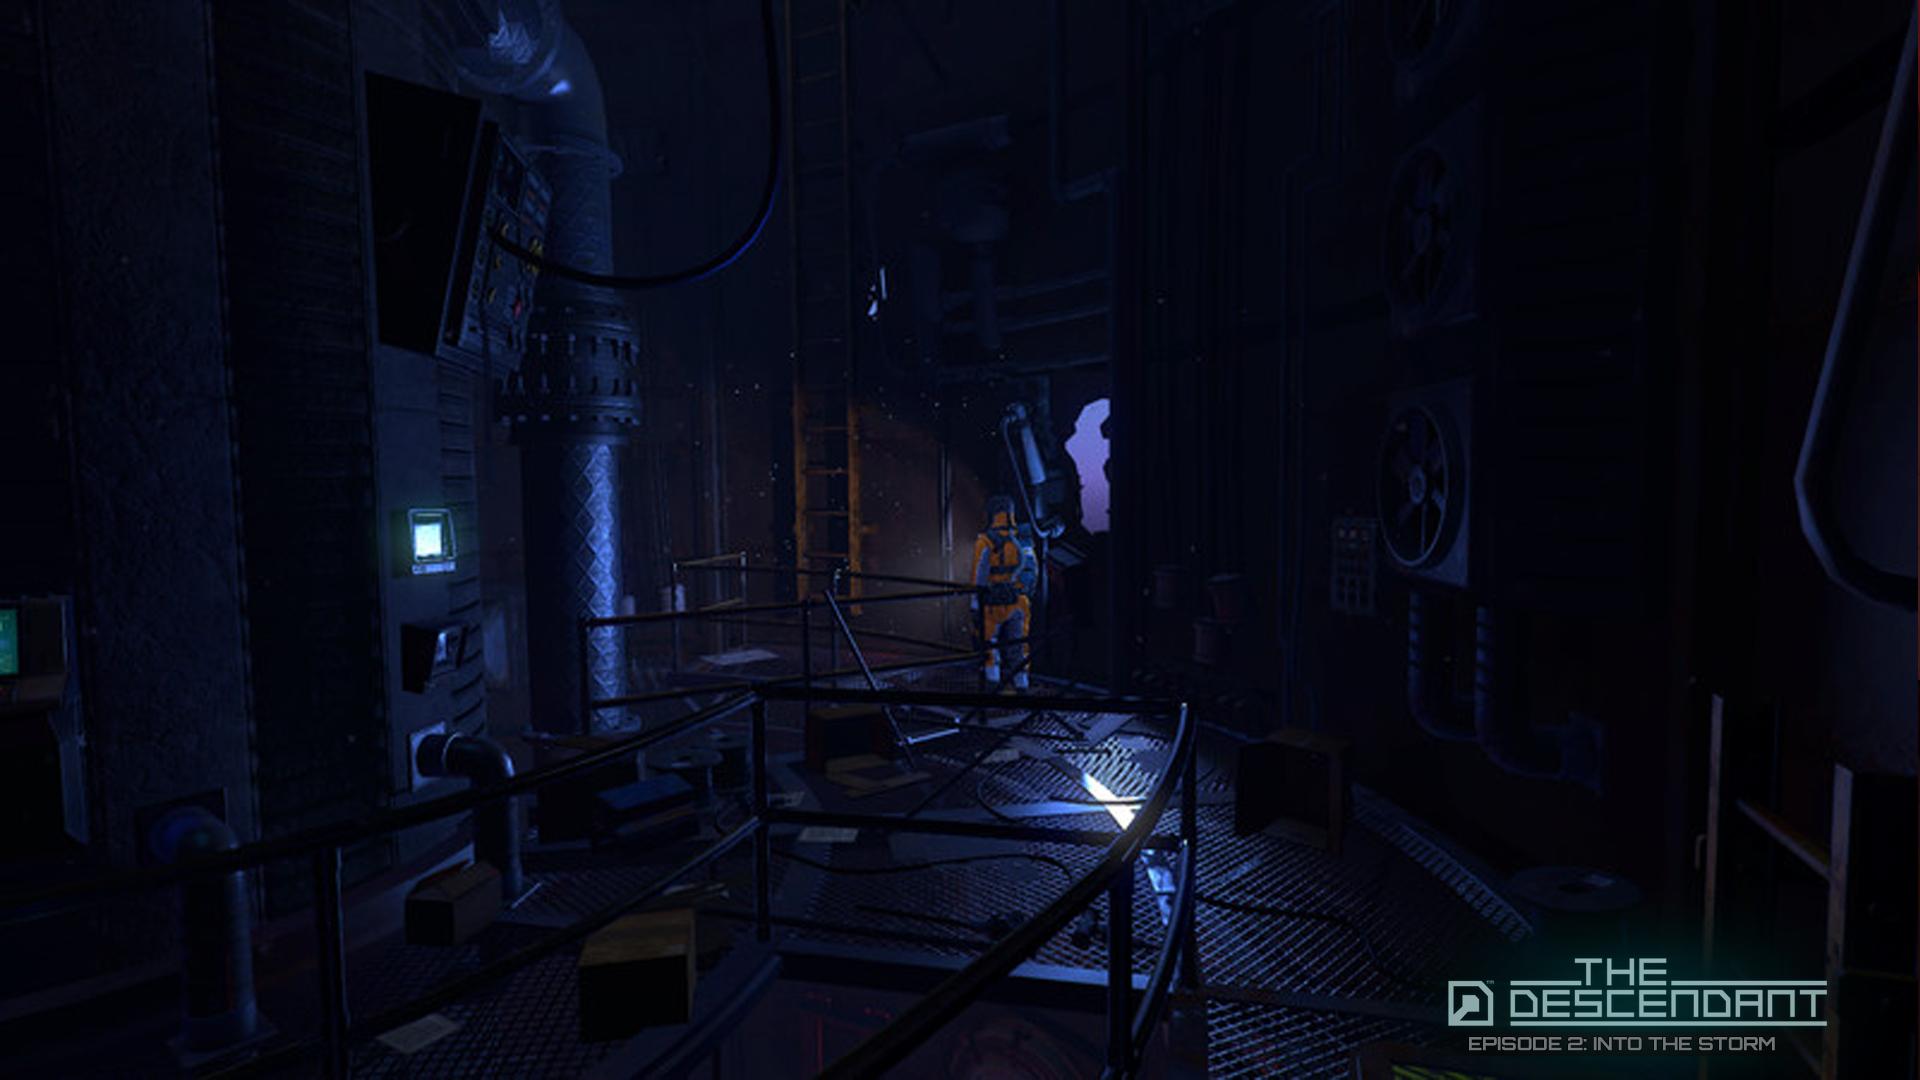 Screenshot №19 from game The Descendant